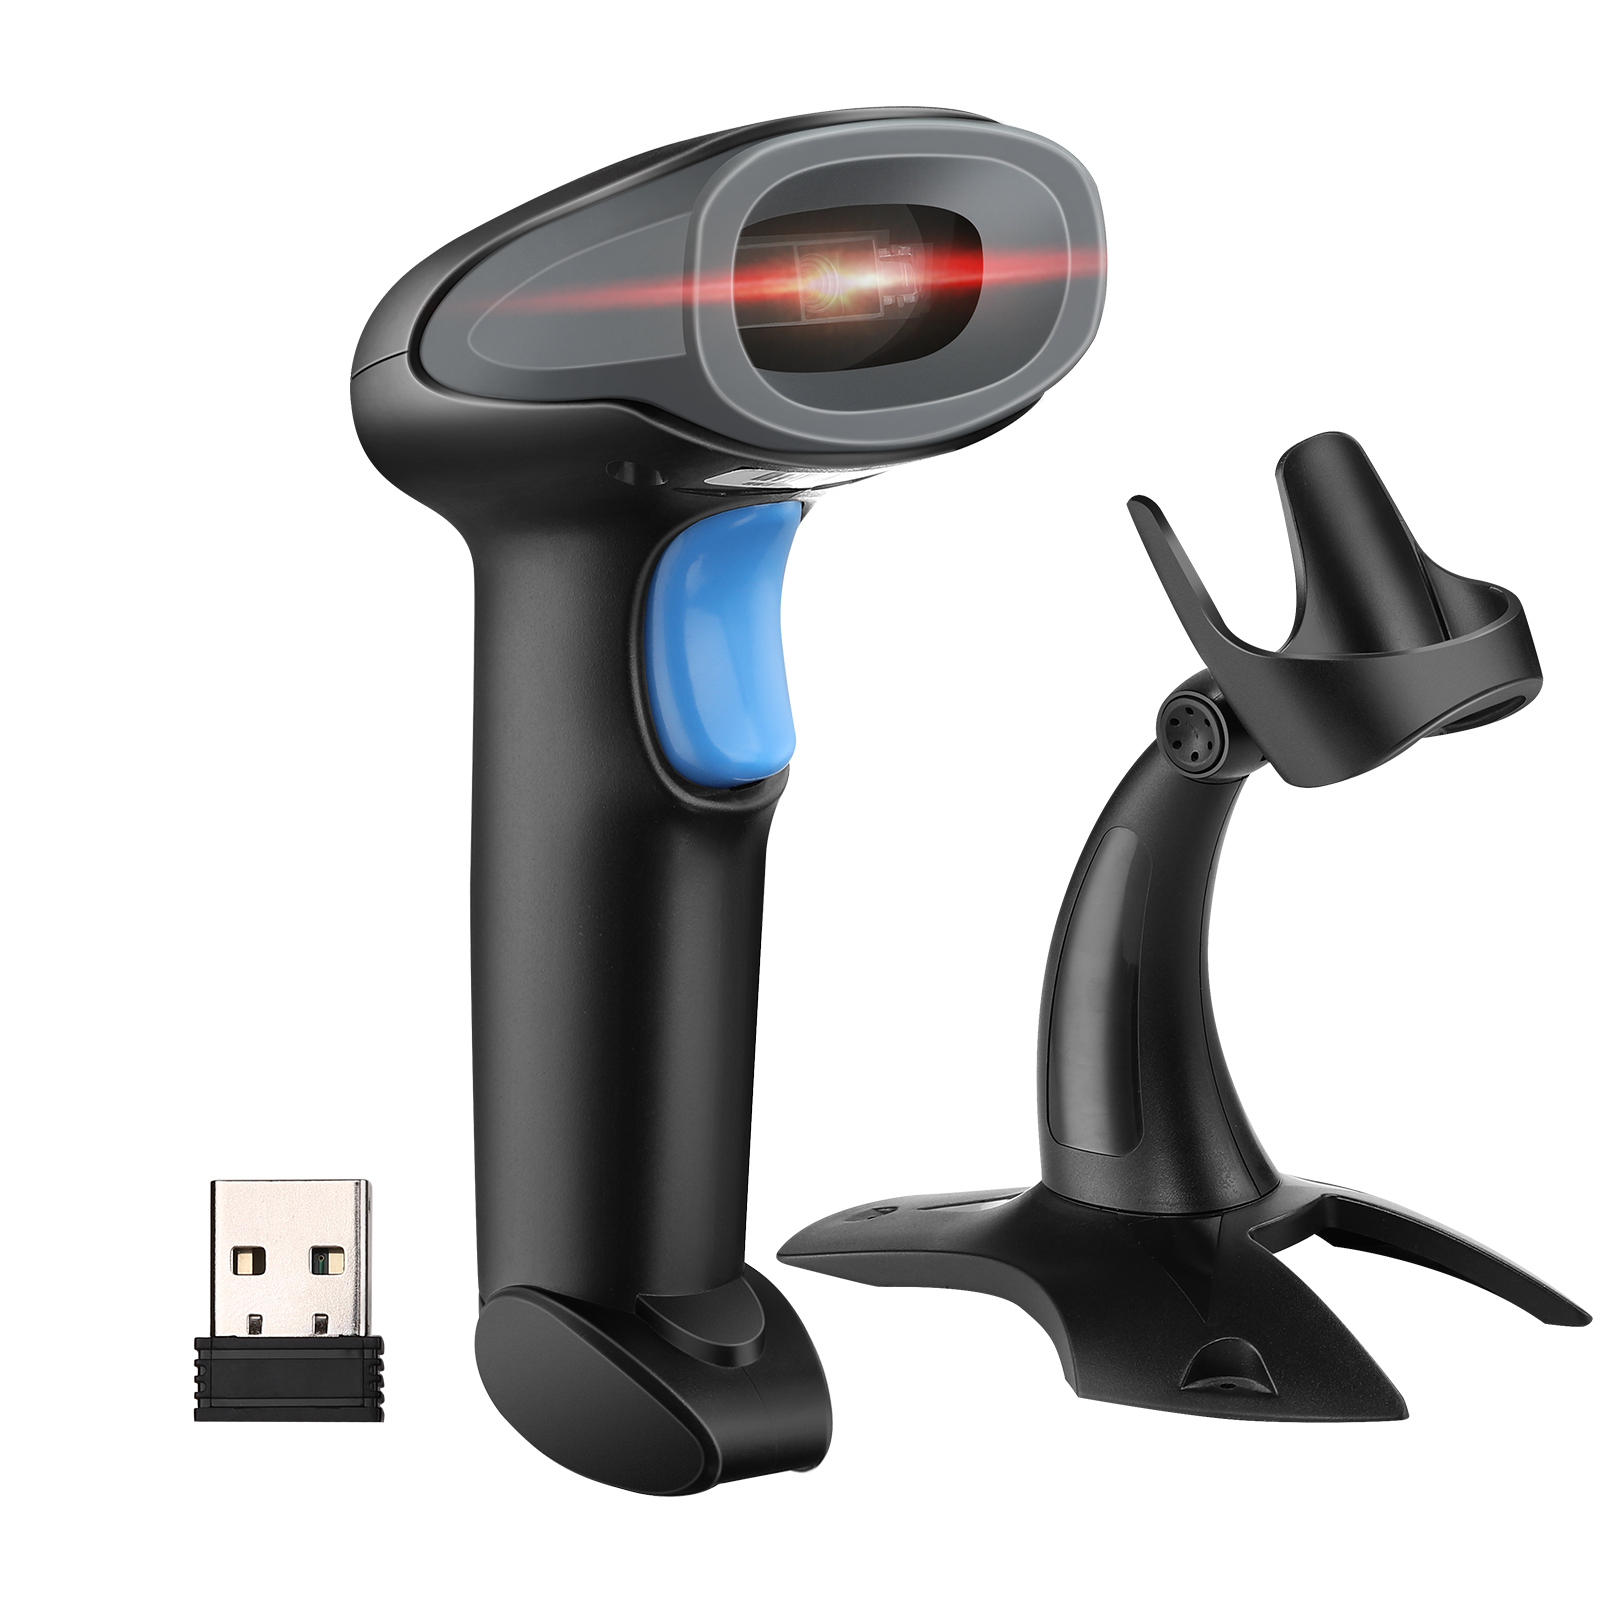 Rechargeable Scan for Inventory Management,Handheld USB Bar Code/QR Code Reader Hand Scanner Eyoyo Wireless 1D 2D Barcode Scanner with Stand 2.4G Wireless & USB Wired,Cordless